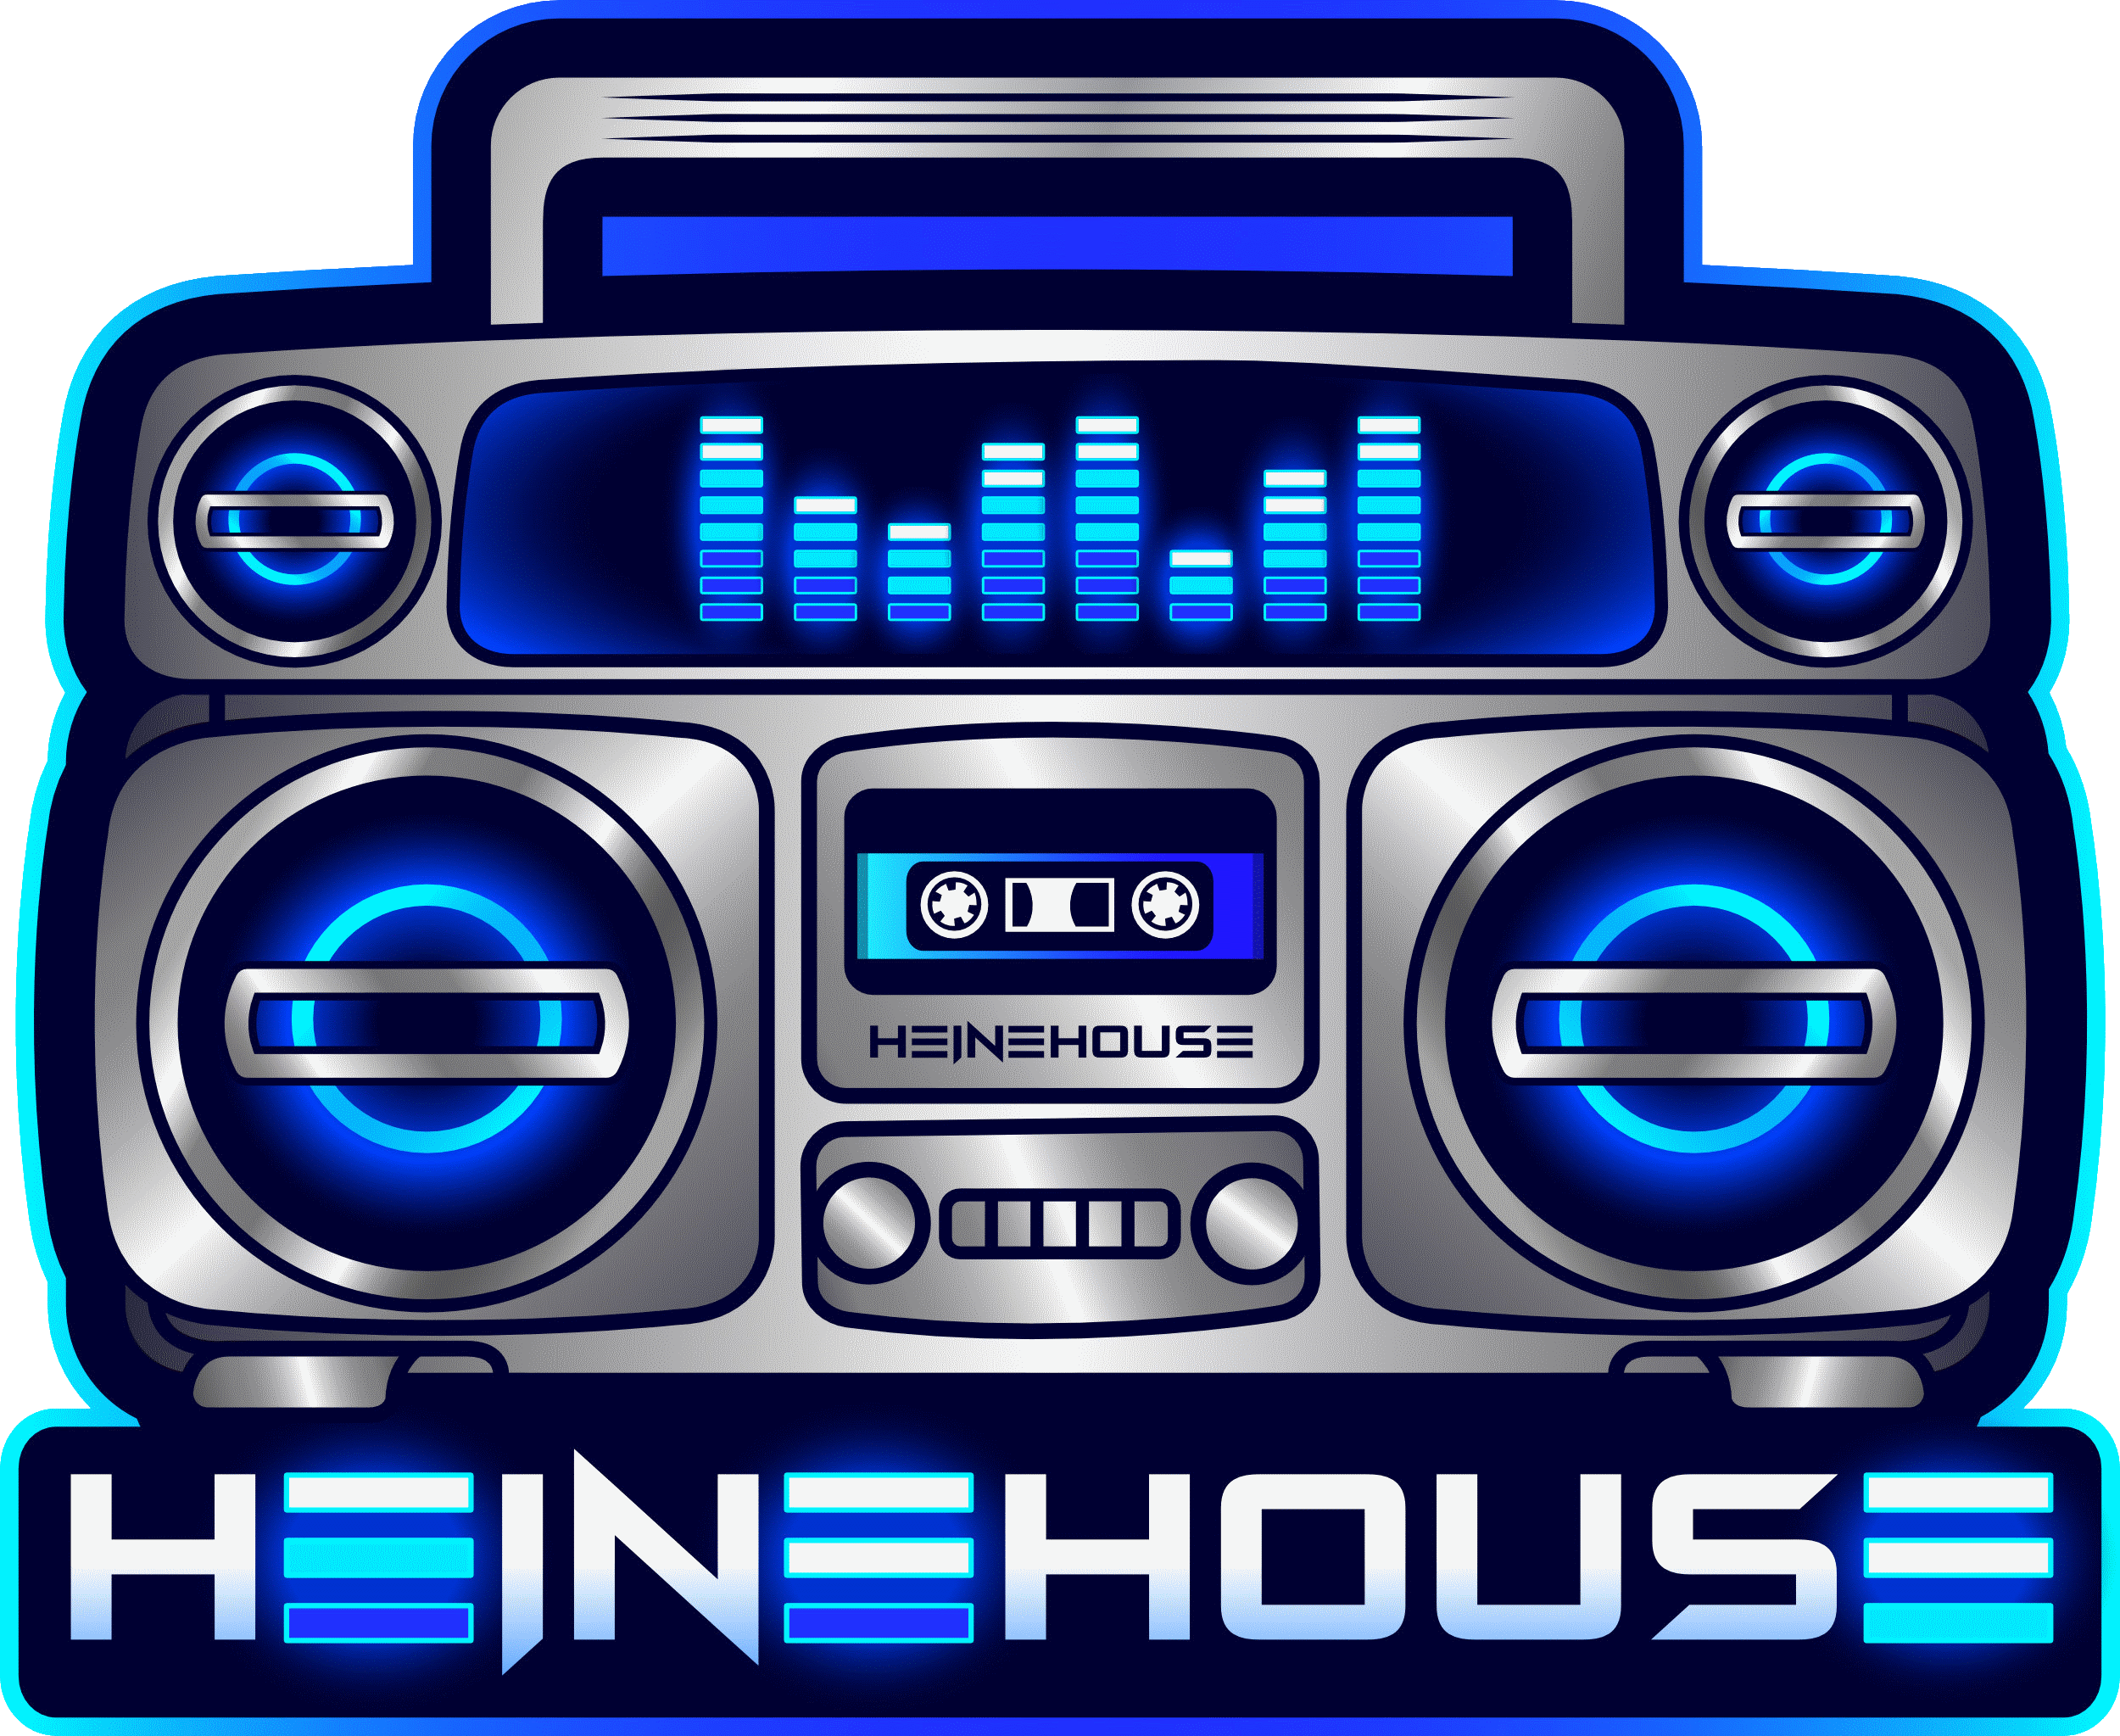 Heine House Gaming & Tech Podcast